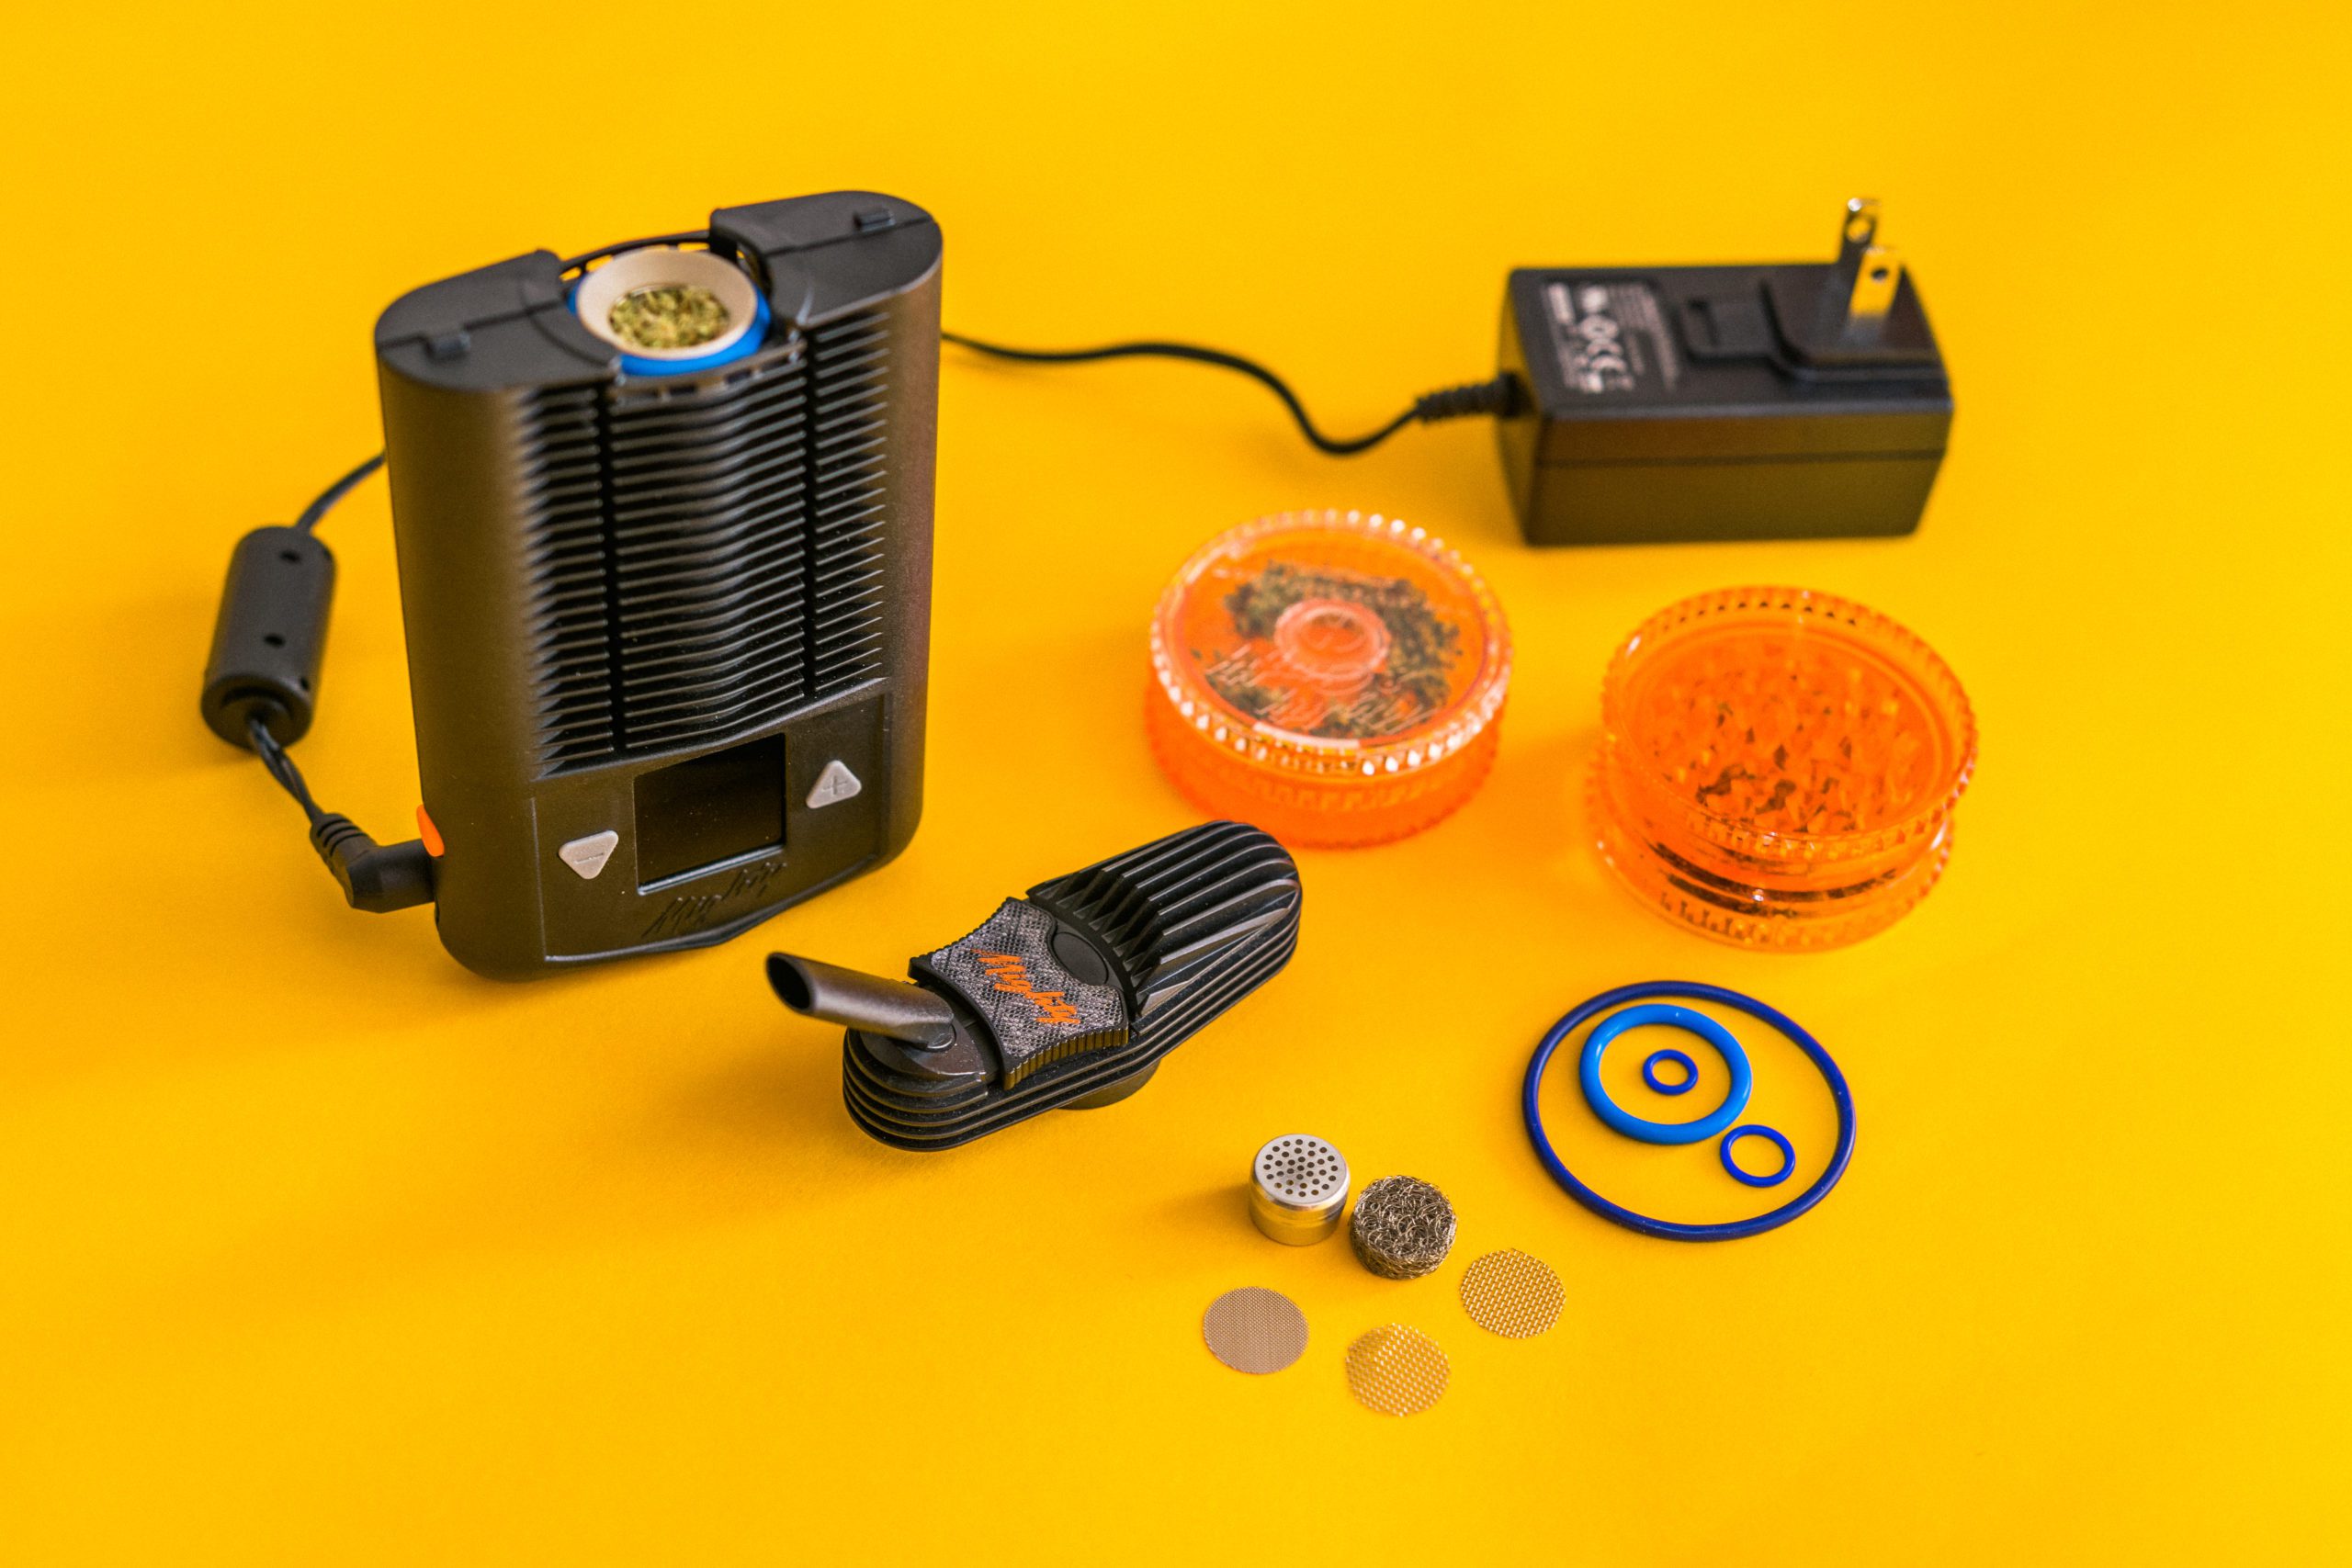 Storz and Bickel Mighty vaporizer